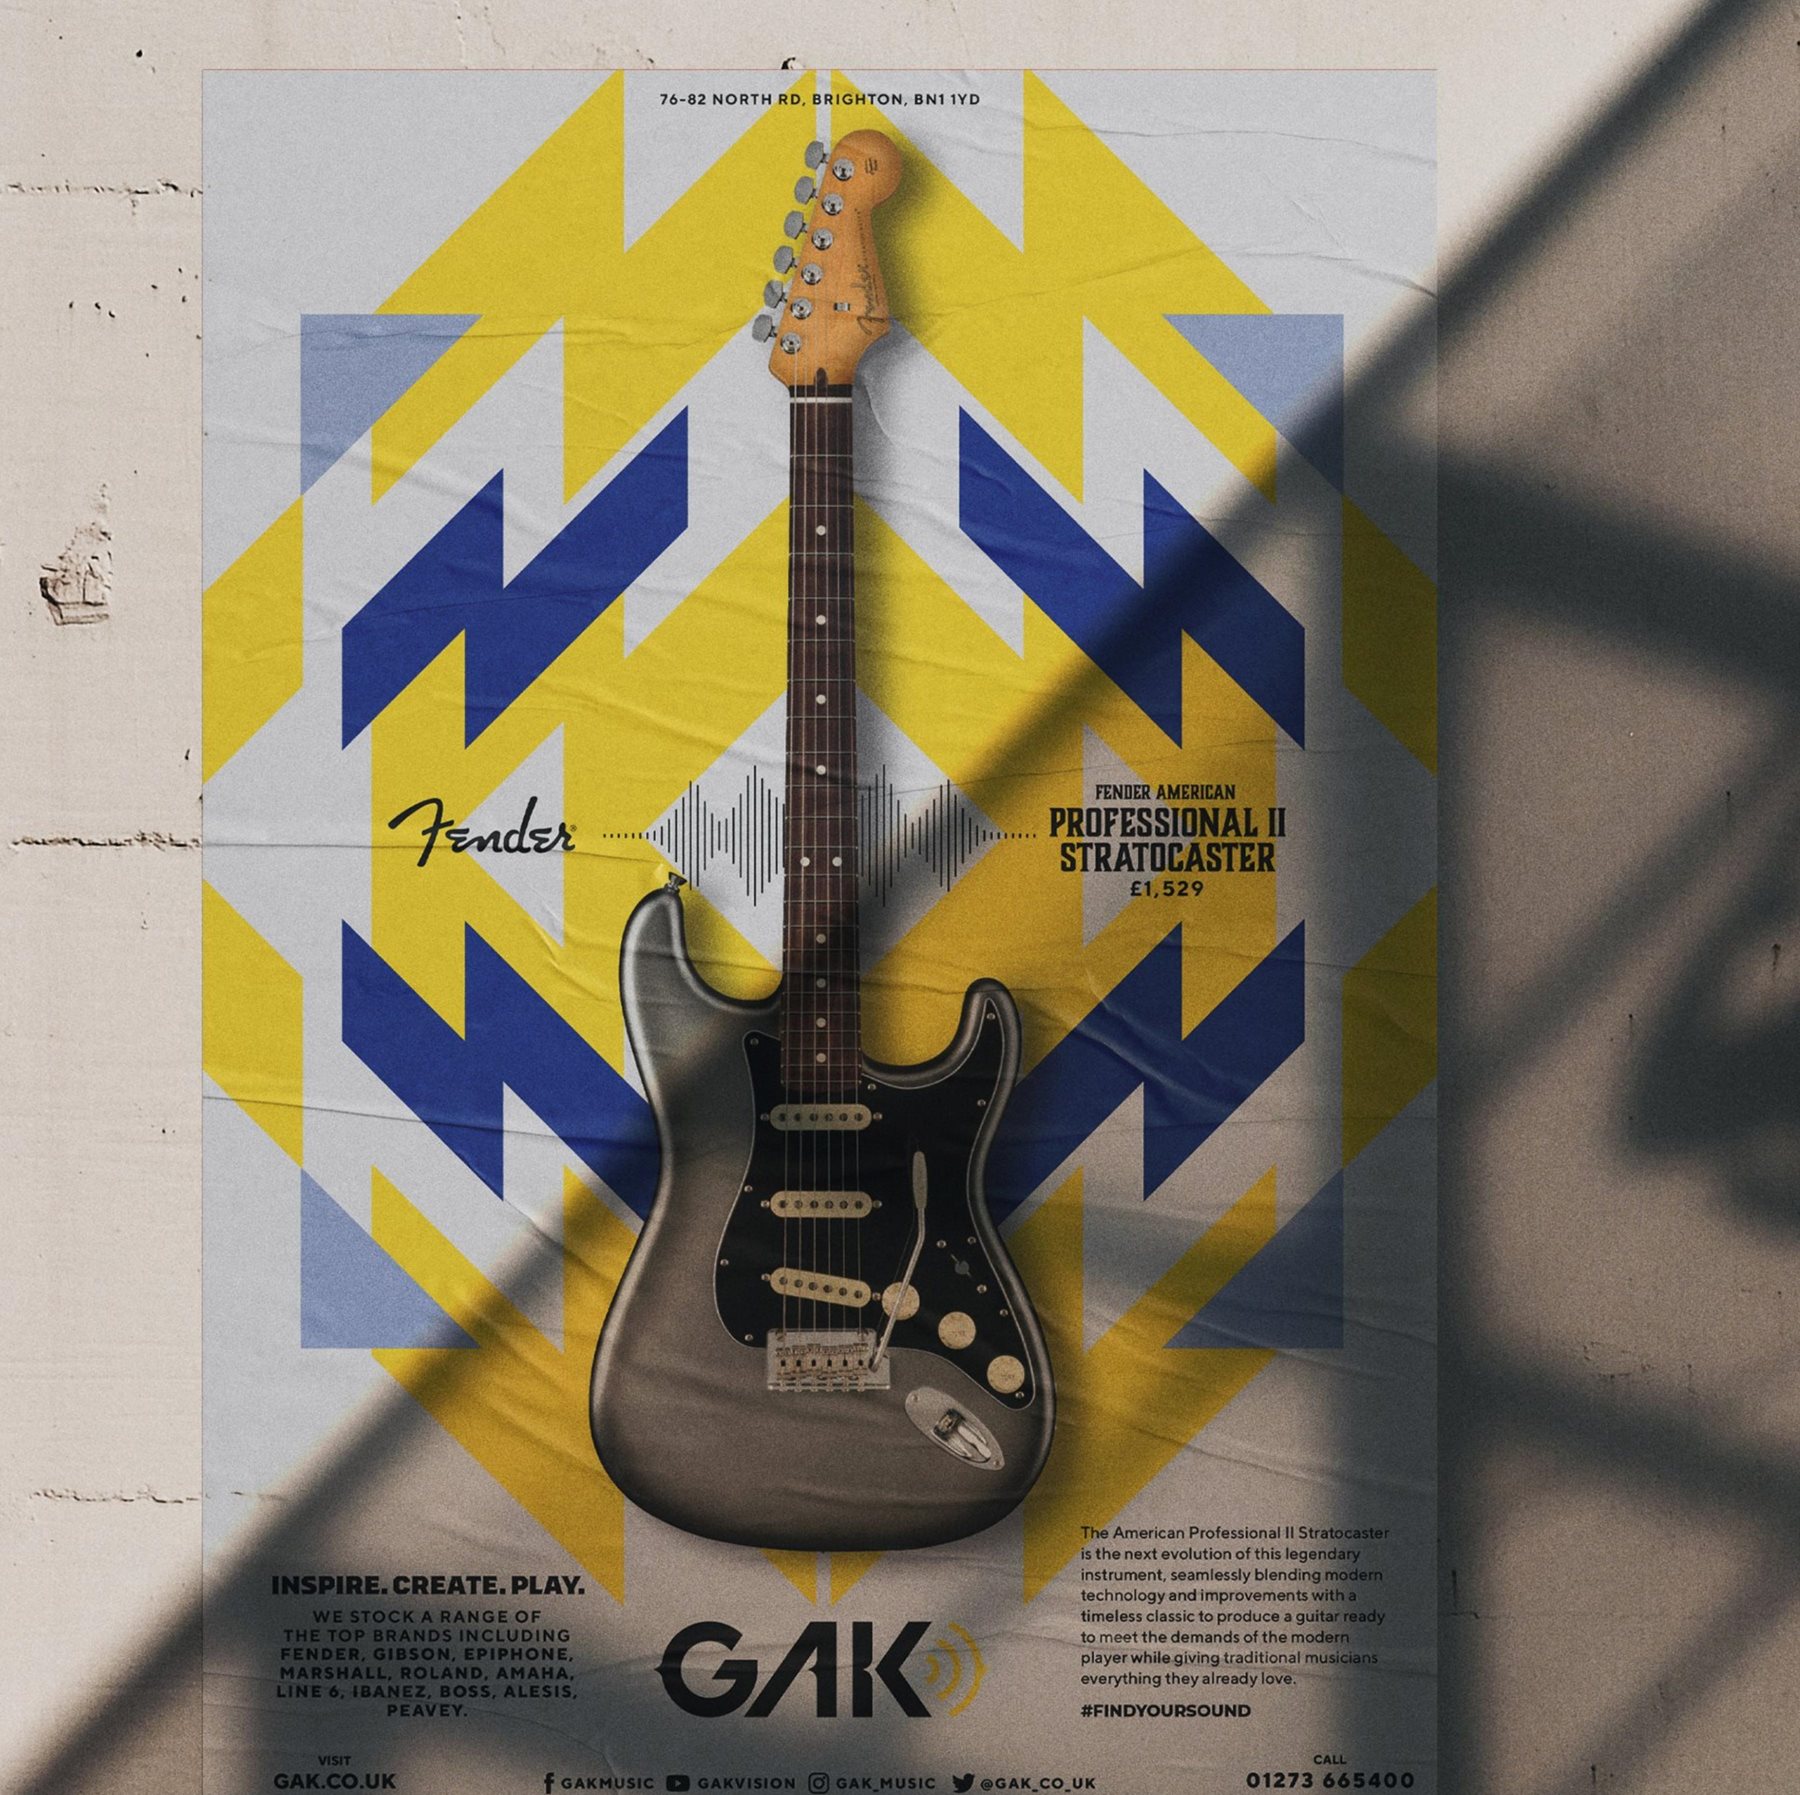 Portrait poster of a guitar with kaleidoscope background of yellow and blue shapes